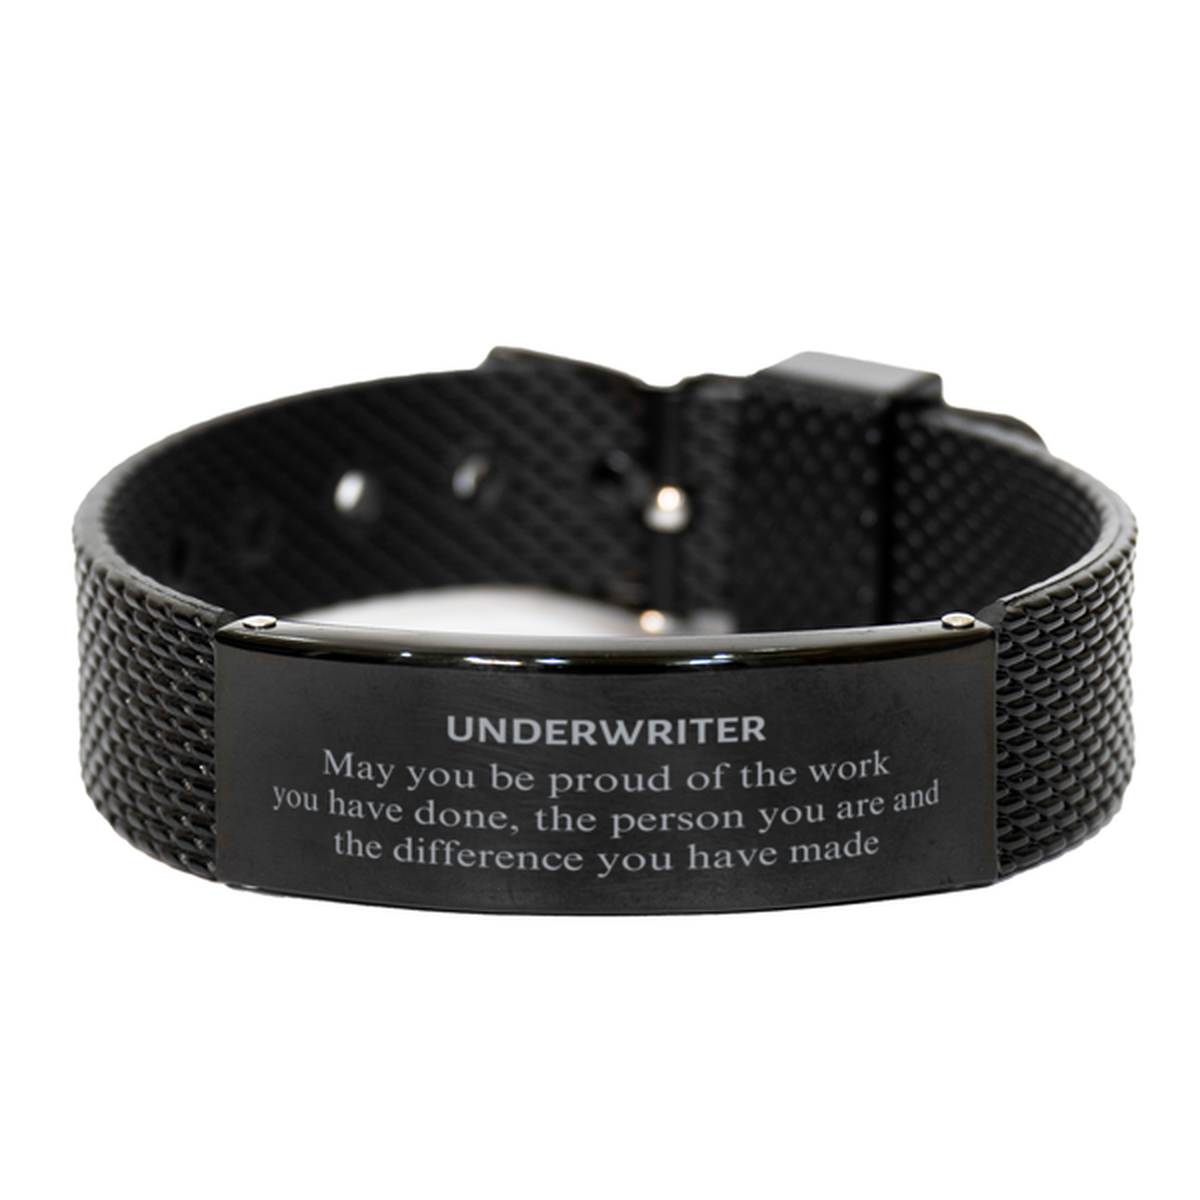 Underwriter May you be proud of the work you have done, Retirement Underwriter Black Shark Mesh Bracelet for Colleague Appreciation Gifts Amazing for Underwriter